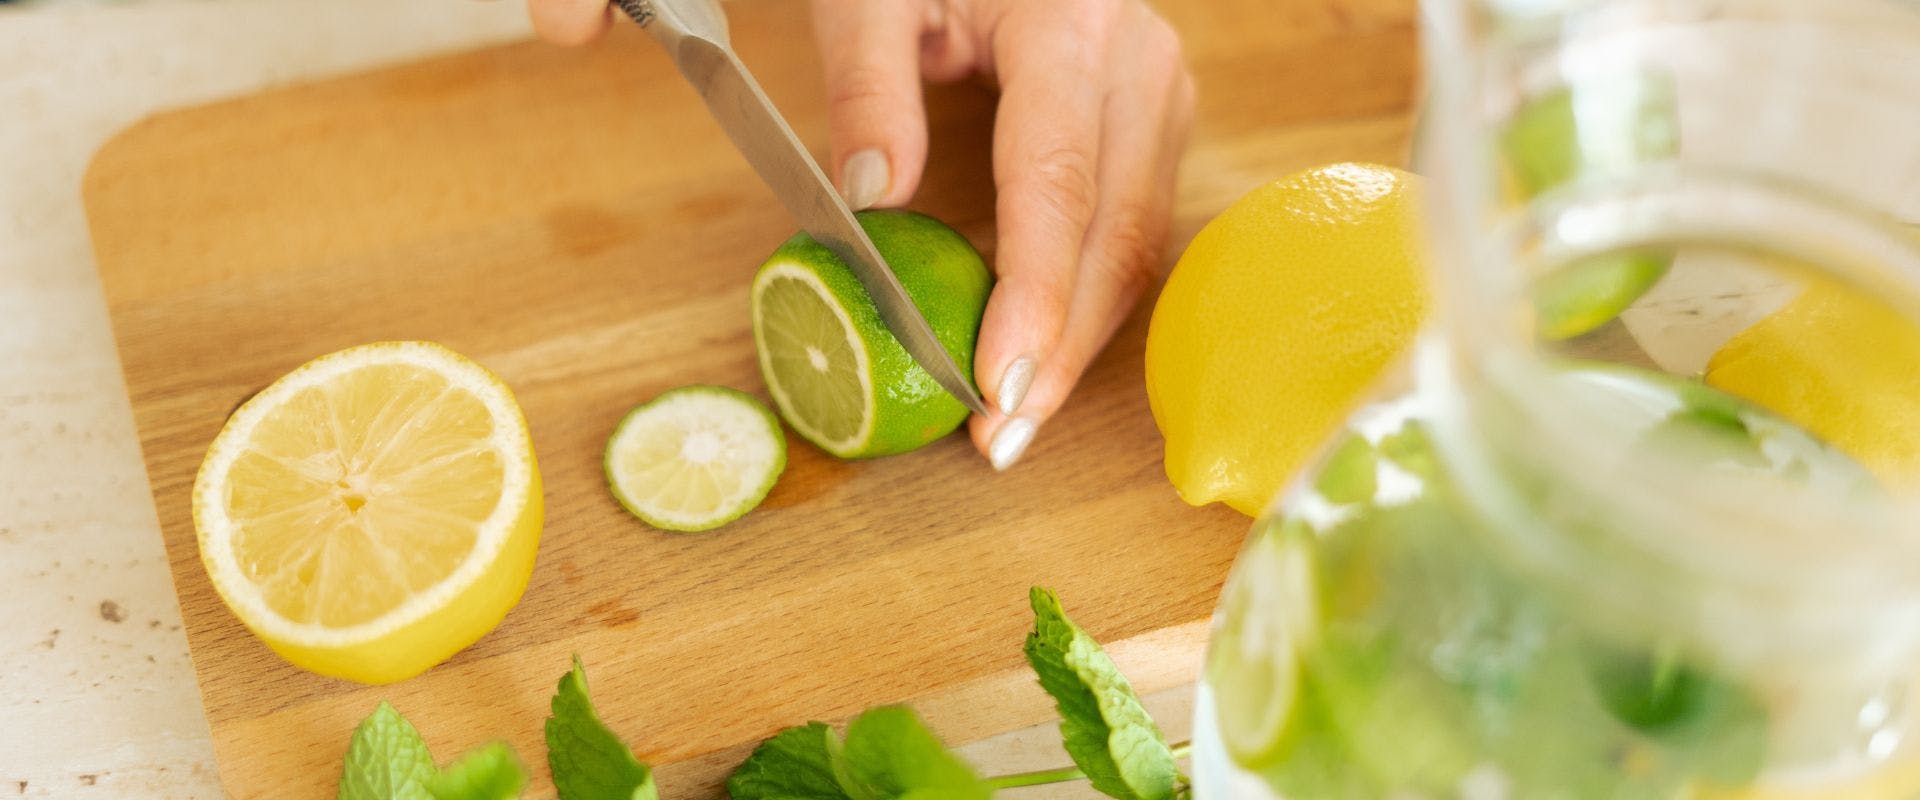 Limes being sliced on a wooden chopping board